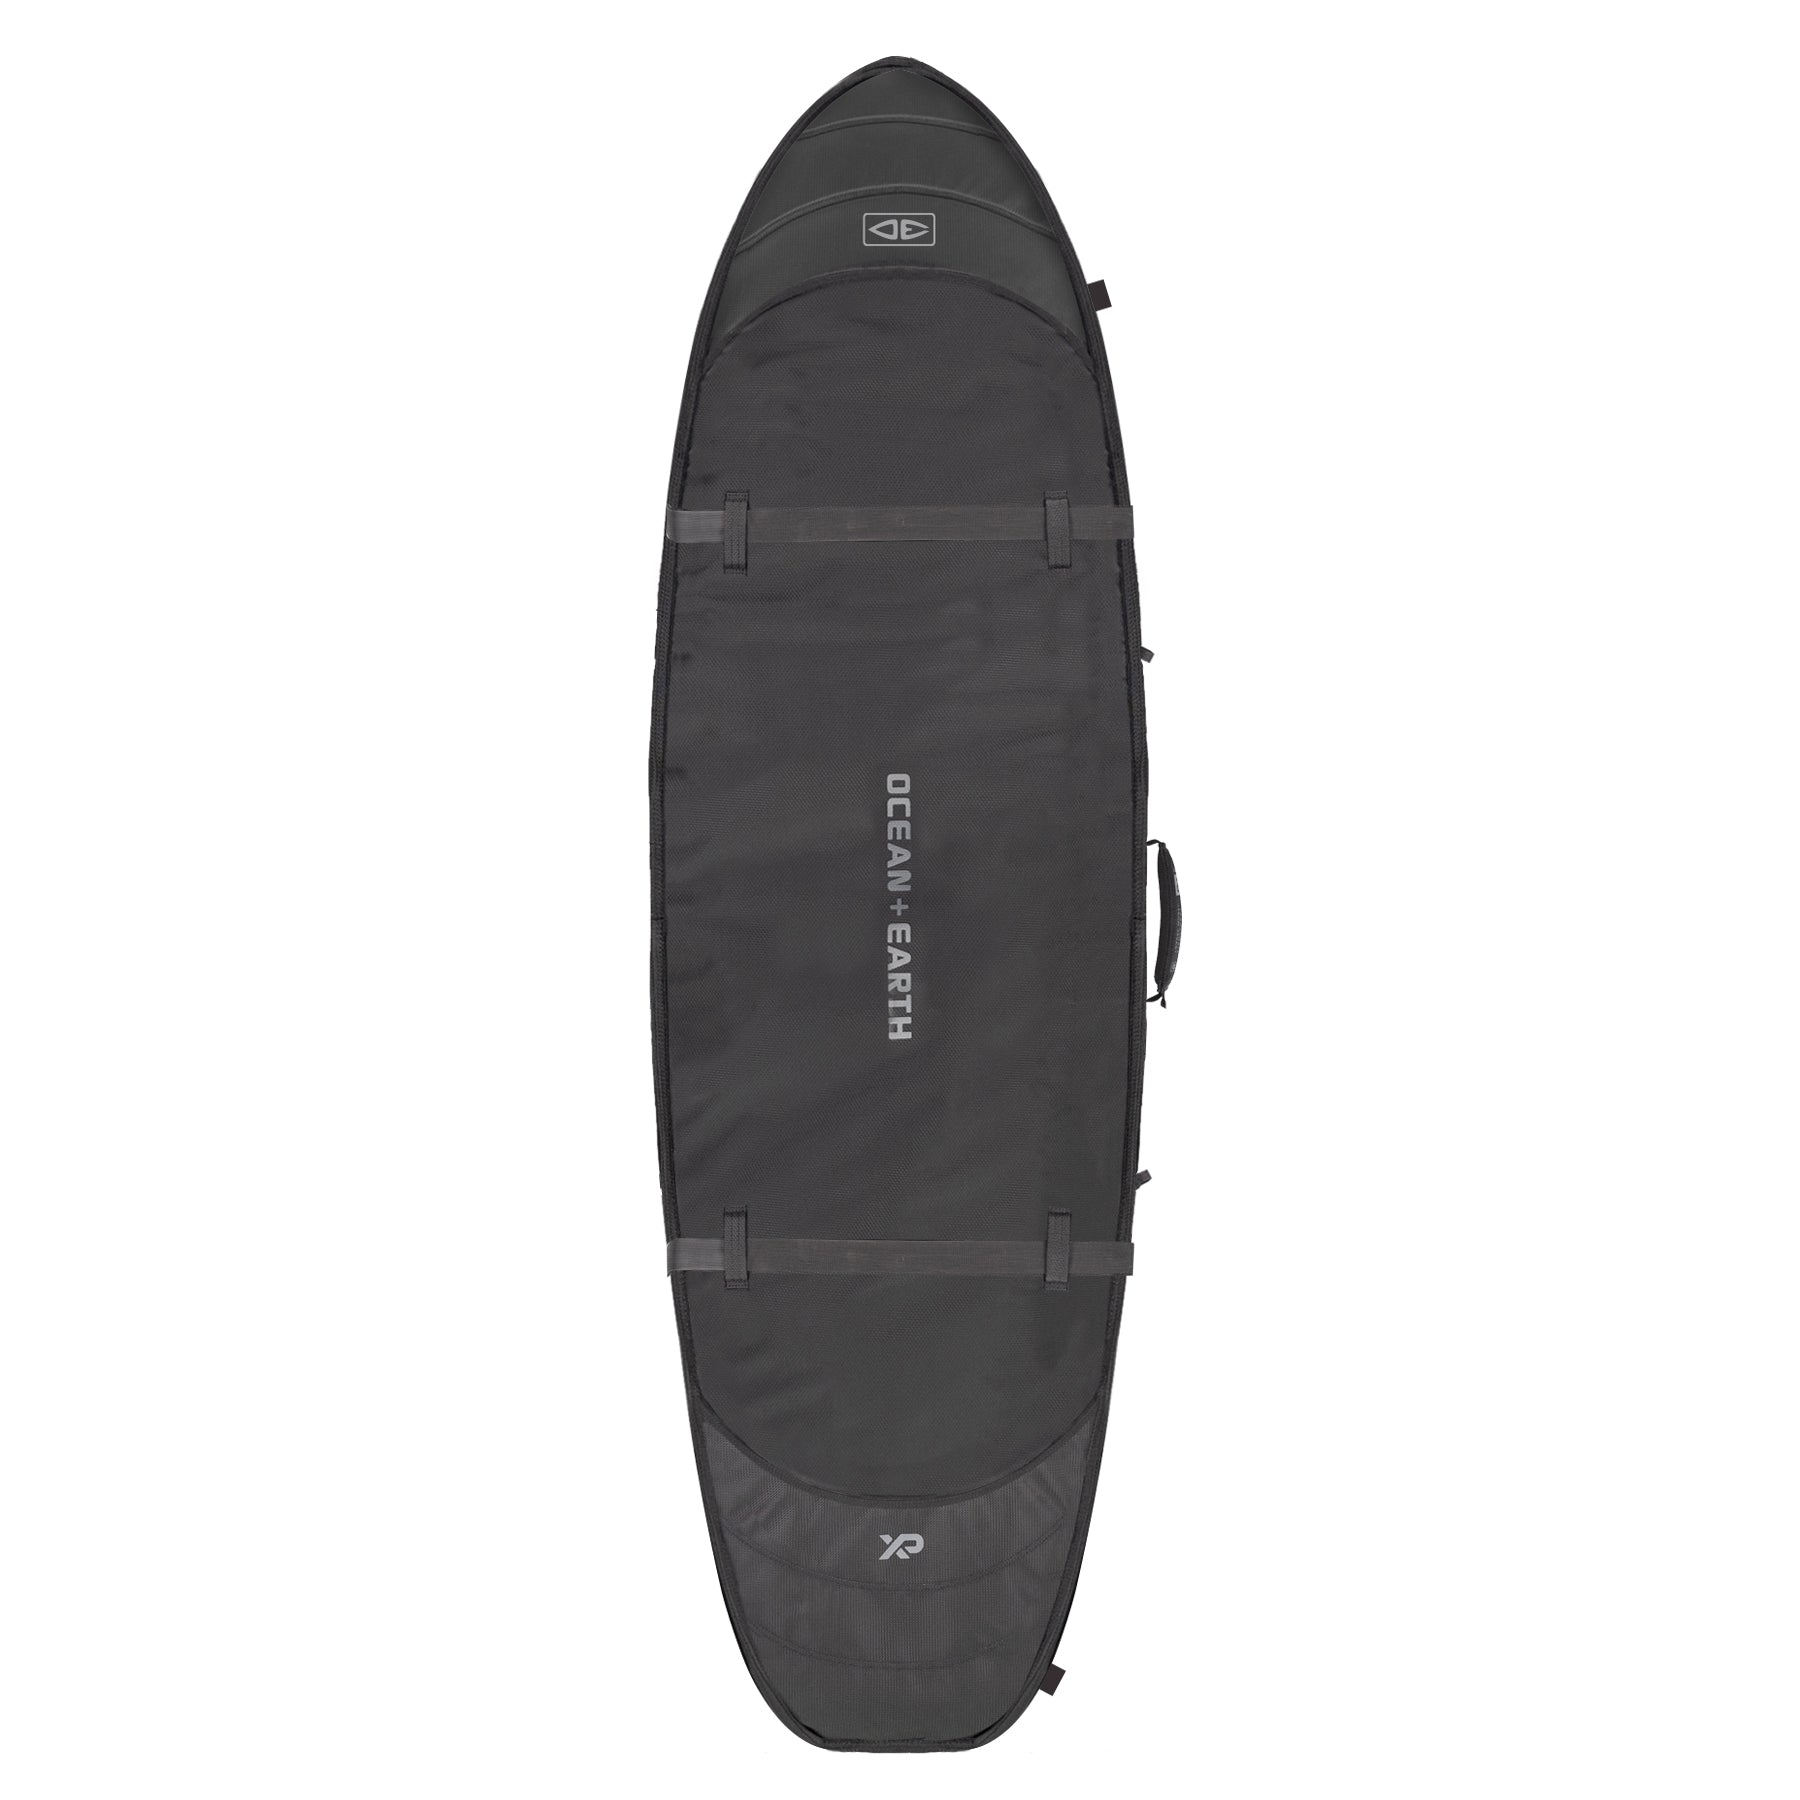 ocean-and-earth-hypa-travel-2-board-6-0-6-6-7-0-7-6-8-0-double-coffin-surfboard-bag-surfboard-protection-galway-ireland-blacksheepsurfco-front